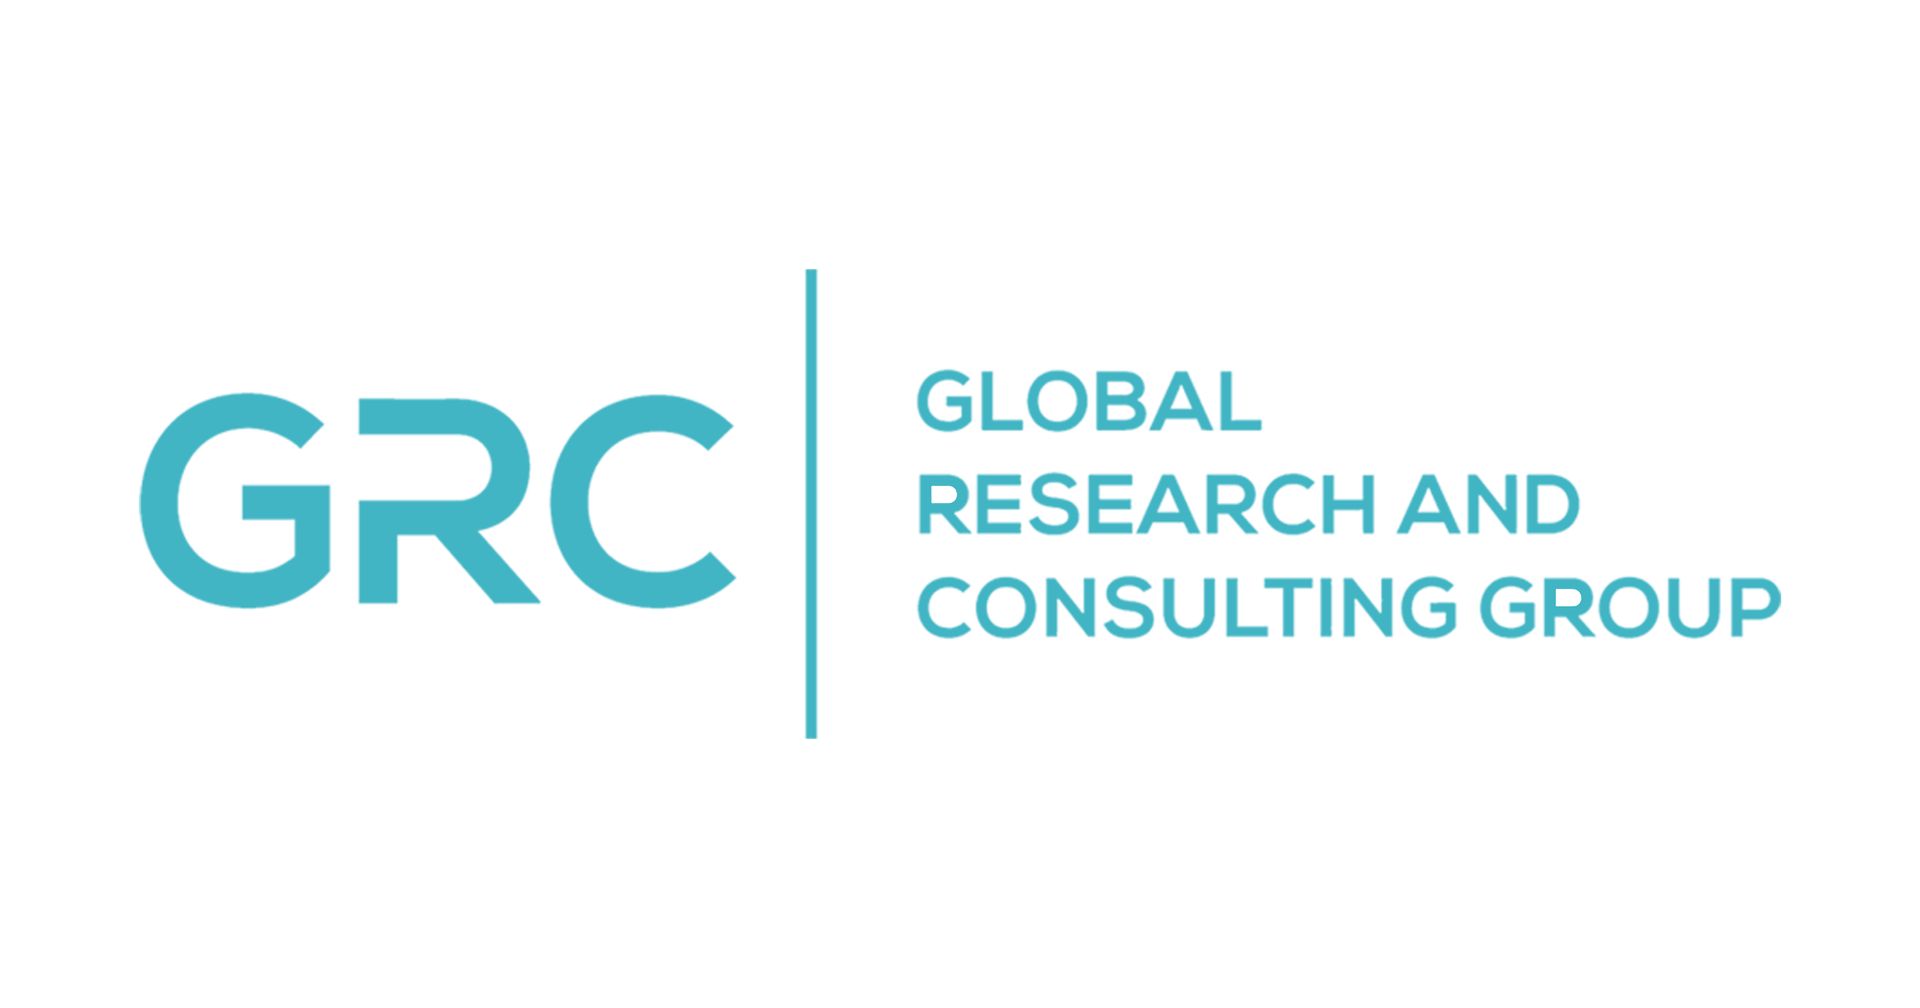 Global Research and Consulting Group at UCLA UCLA Community